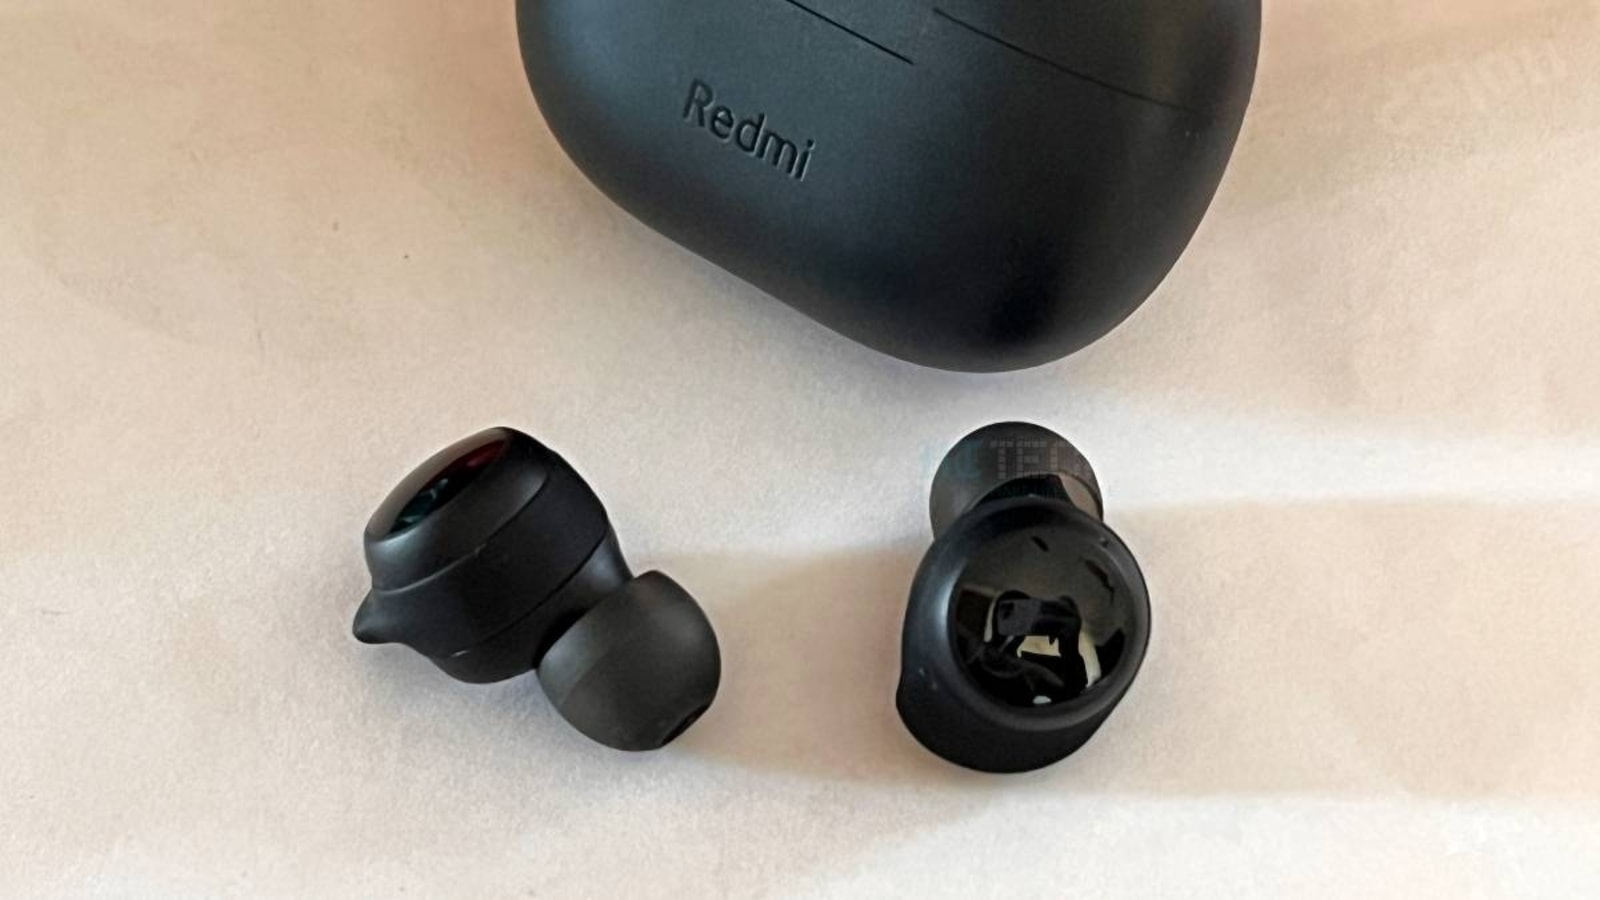 Redmi Buds 4 Active earbuds review: One of the best for the price